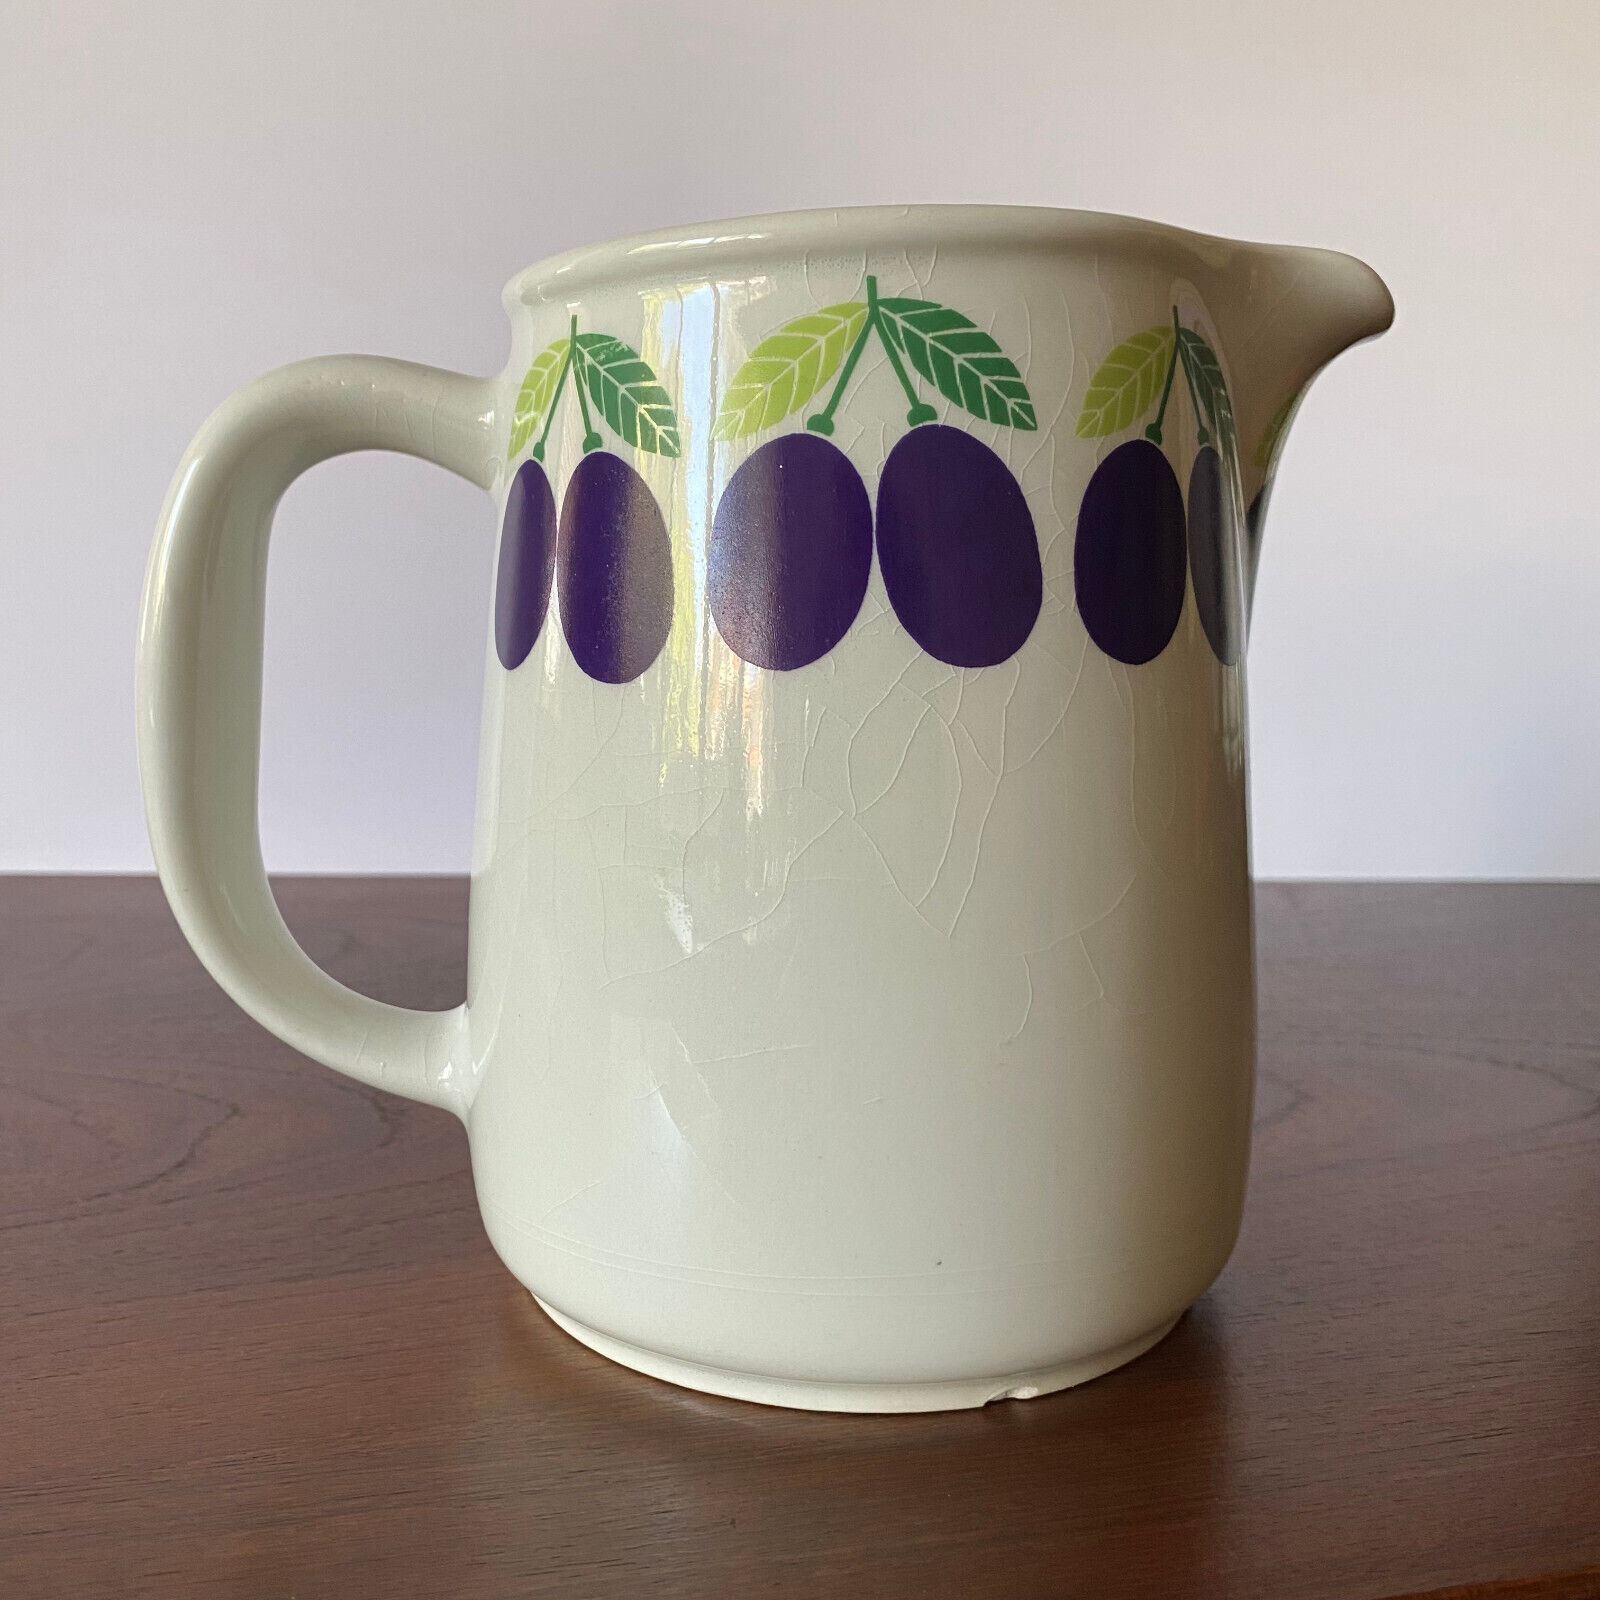 Read more about the article Plums Arabia Pomona Pitcher Jug Finland mid century modern